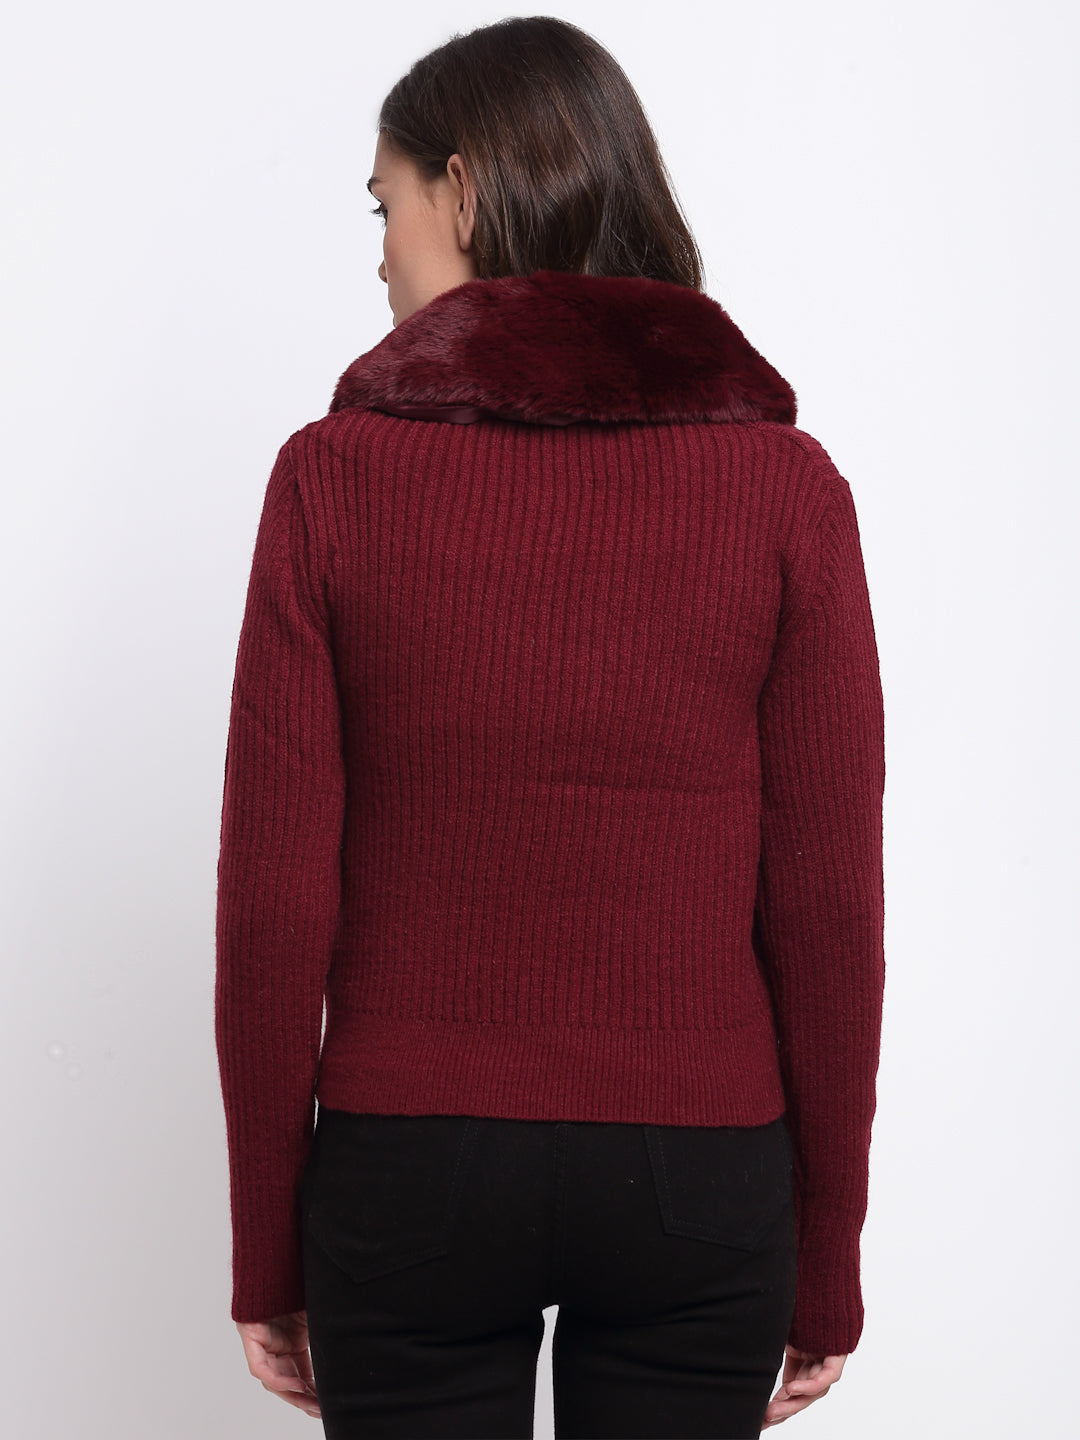 Buy Best Collared Solid KNIT Cardigan With Maroon